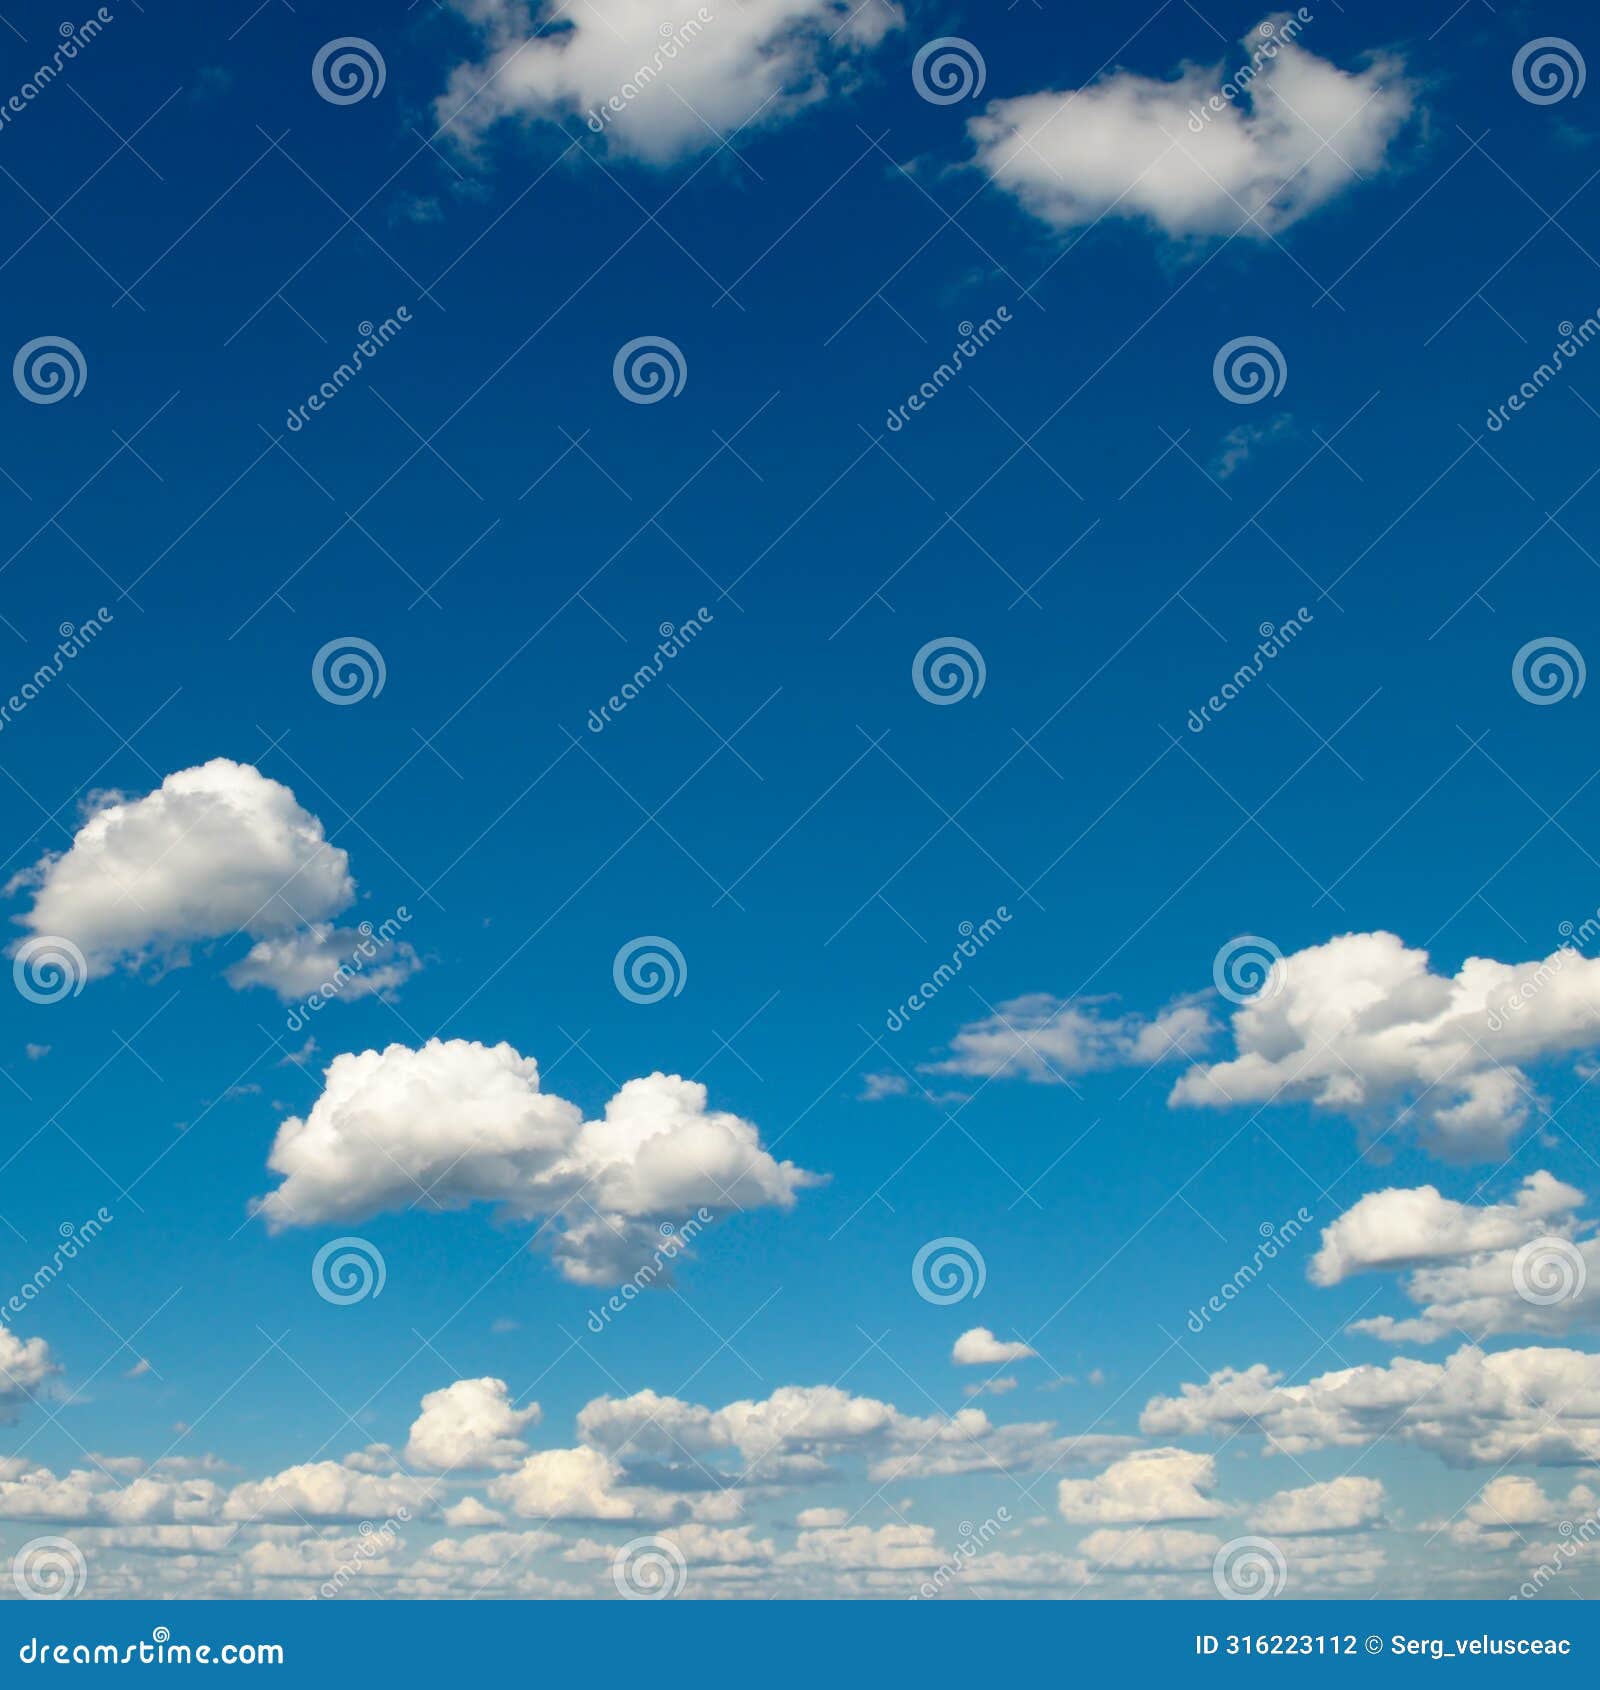 white fluffy clouds and sun on dark blue sky